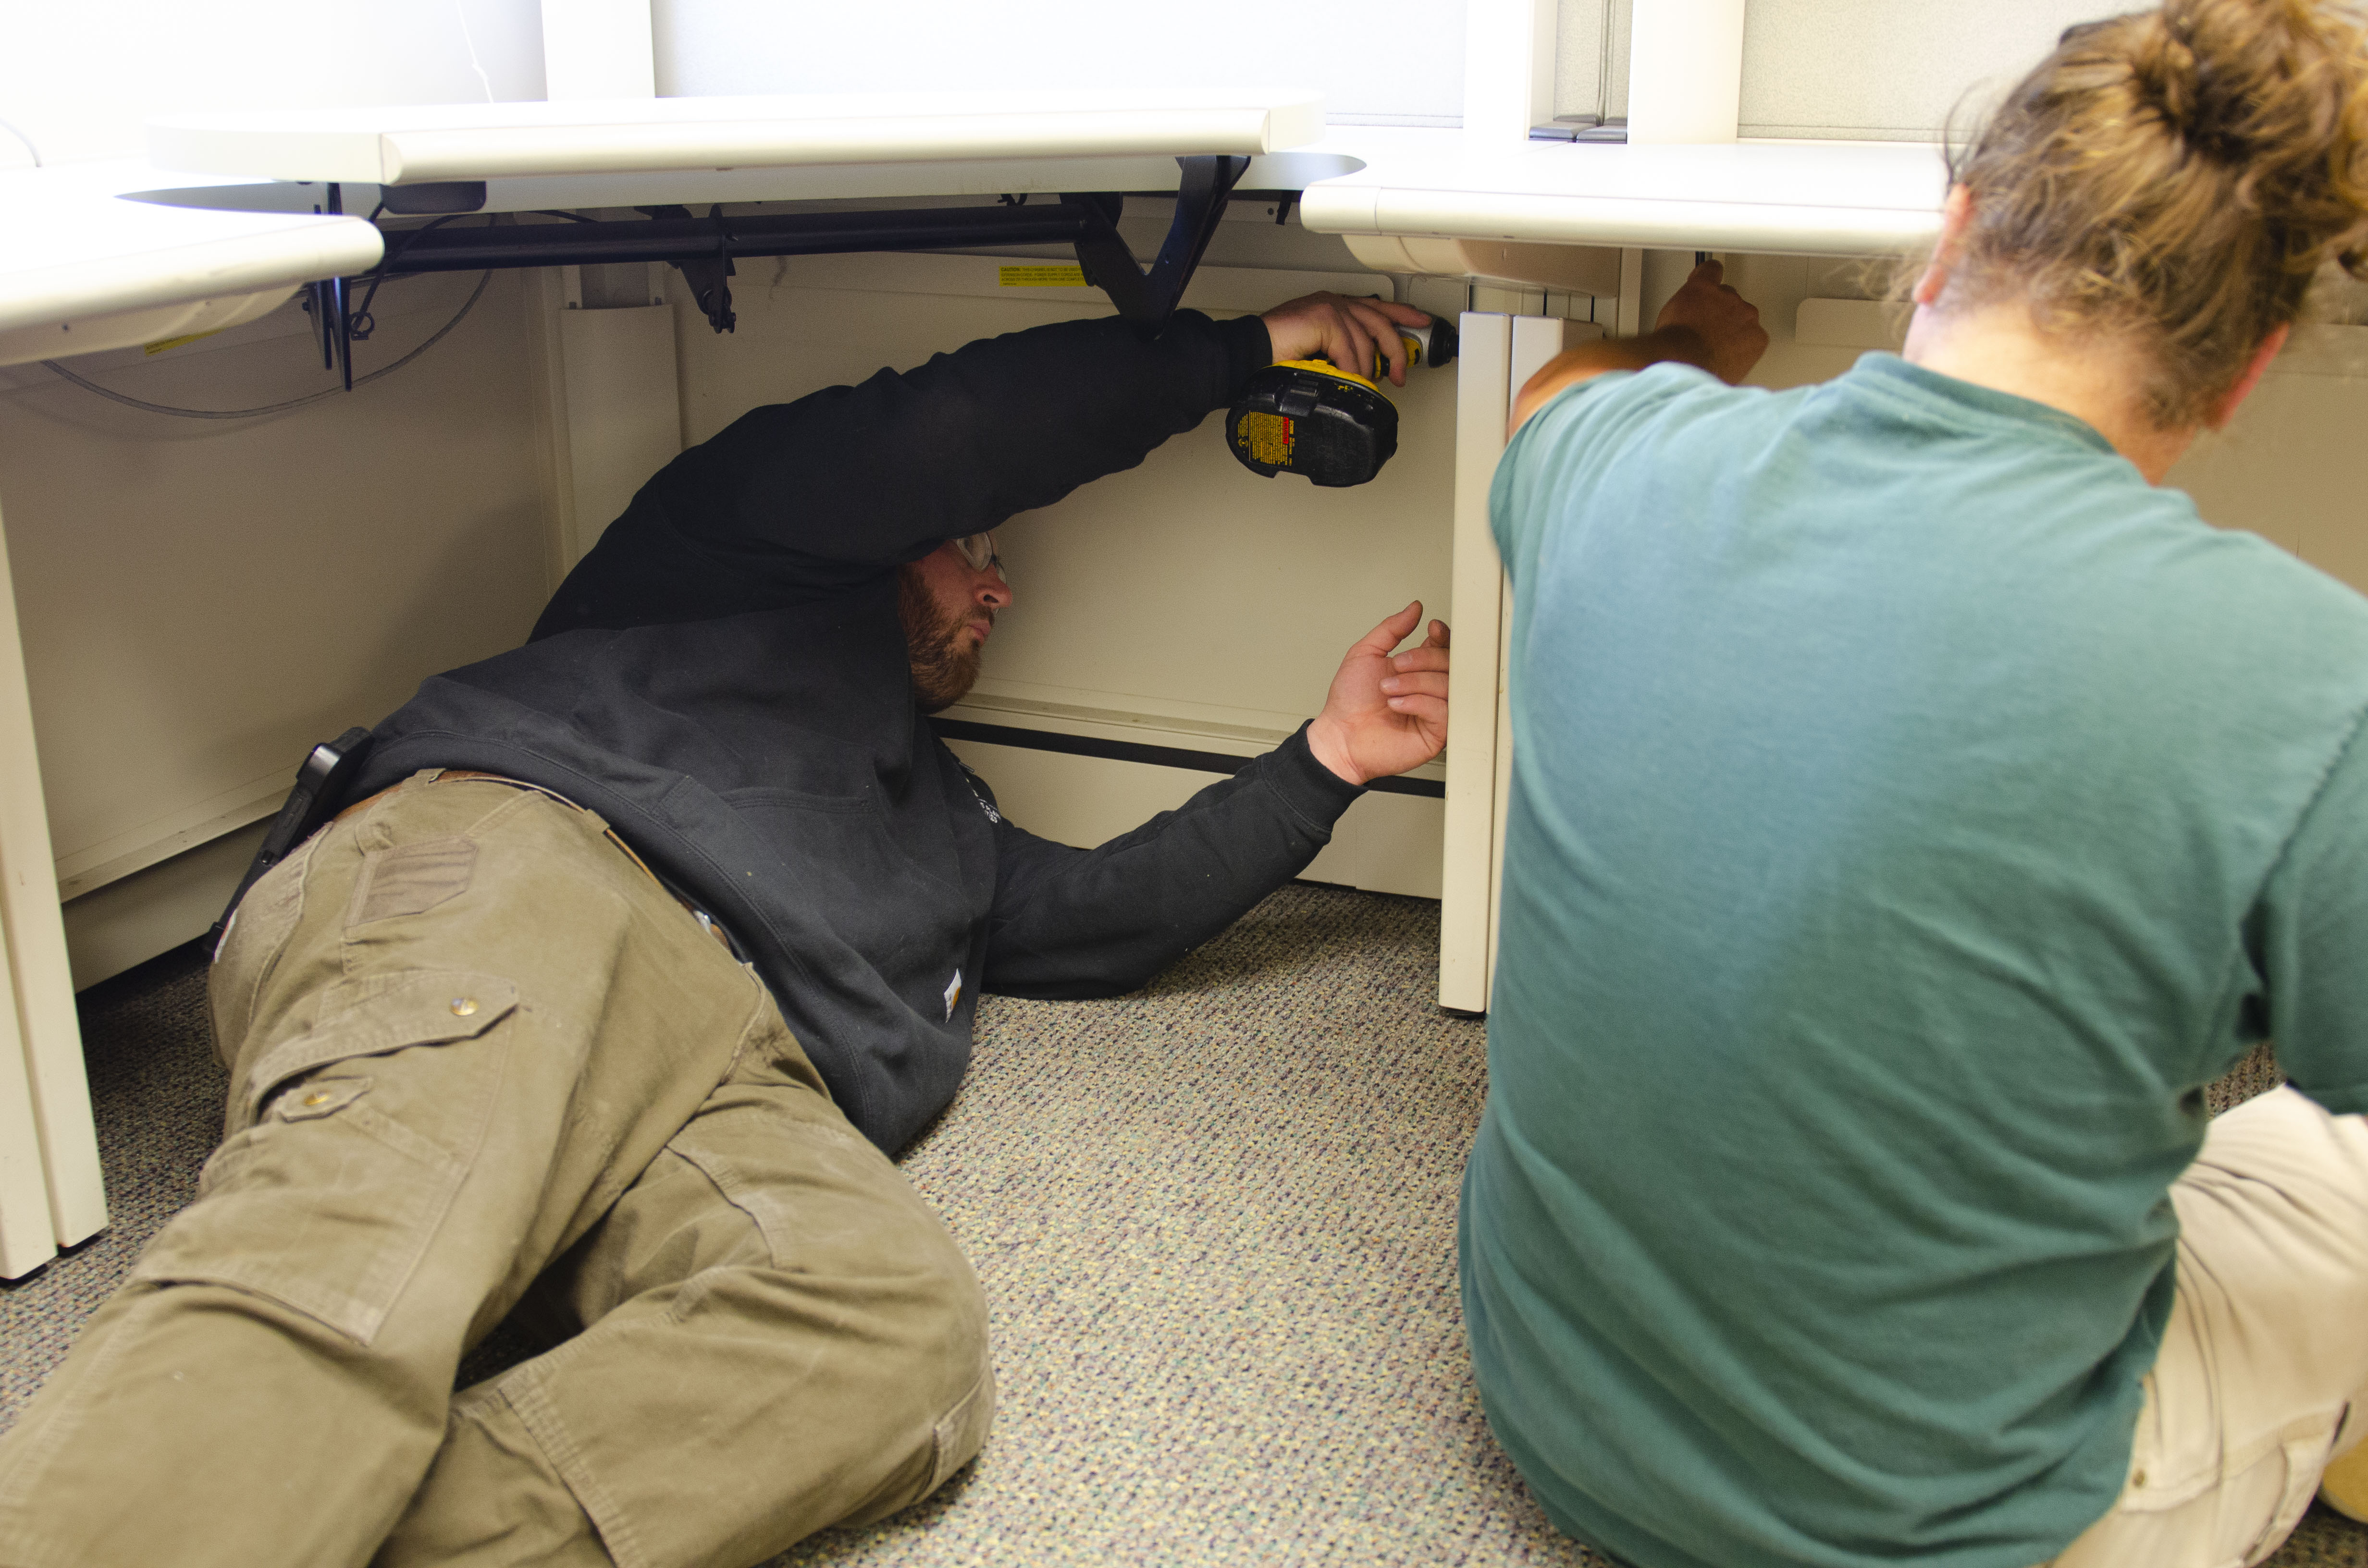 Josh Radon and Tom Cousins moving cubicle furniture in a faculty office